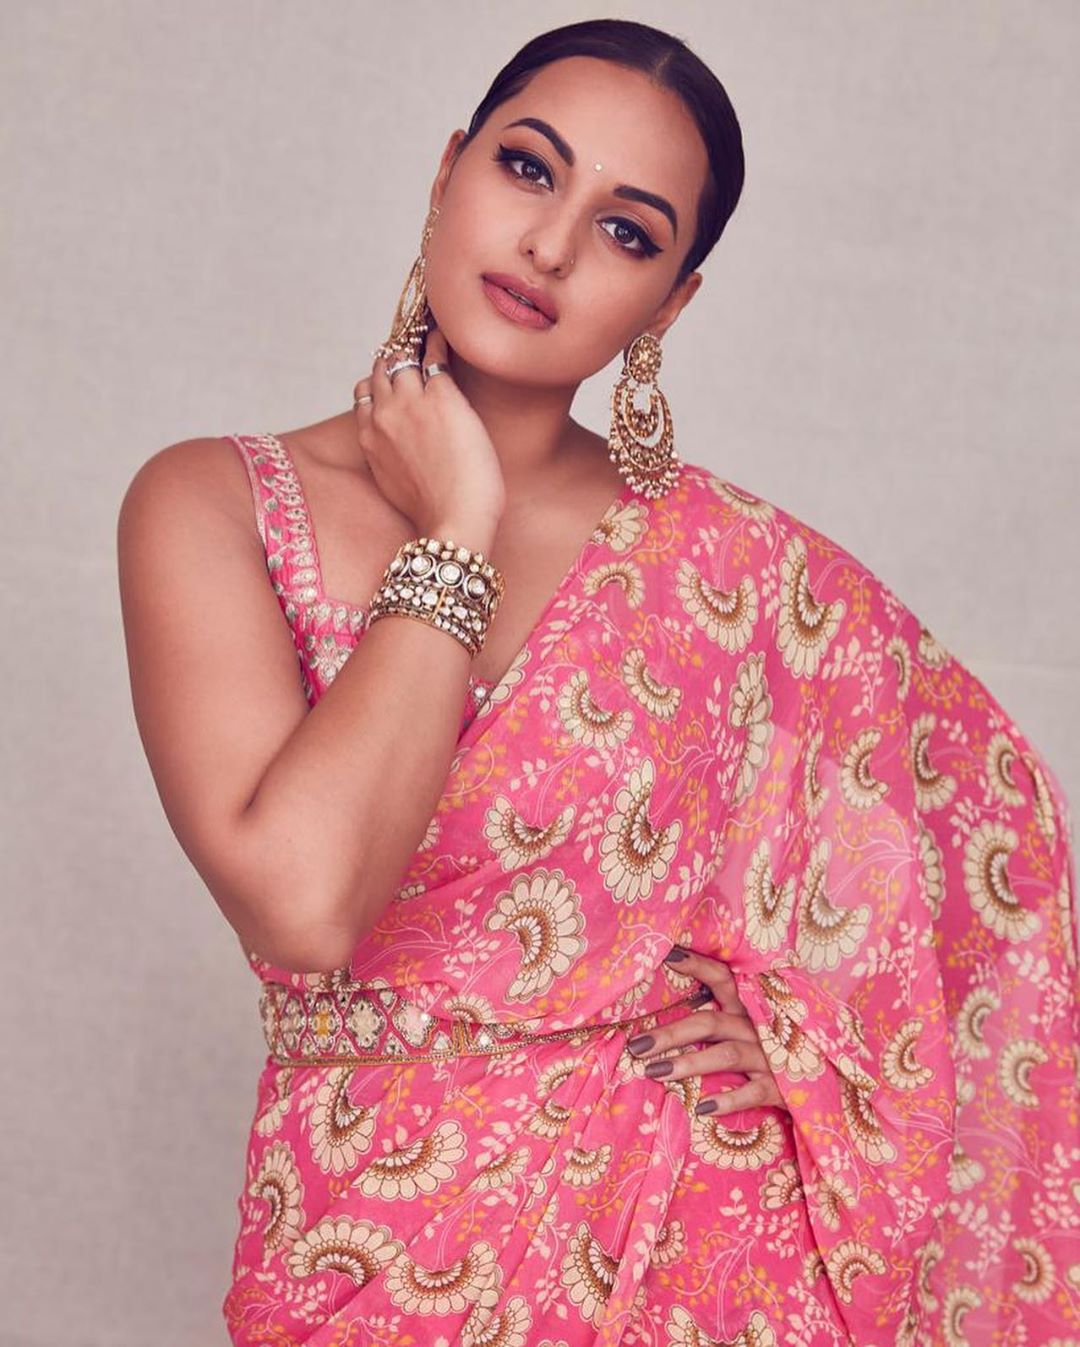 Dabangg 3 Actress Sonakshi Sinha Slays In Her Latest Pink Saree Avatar Check Out The Pictures